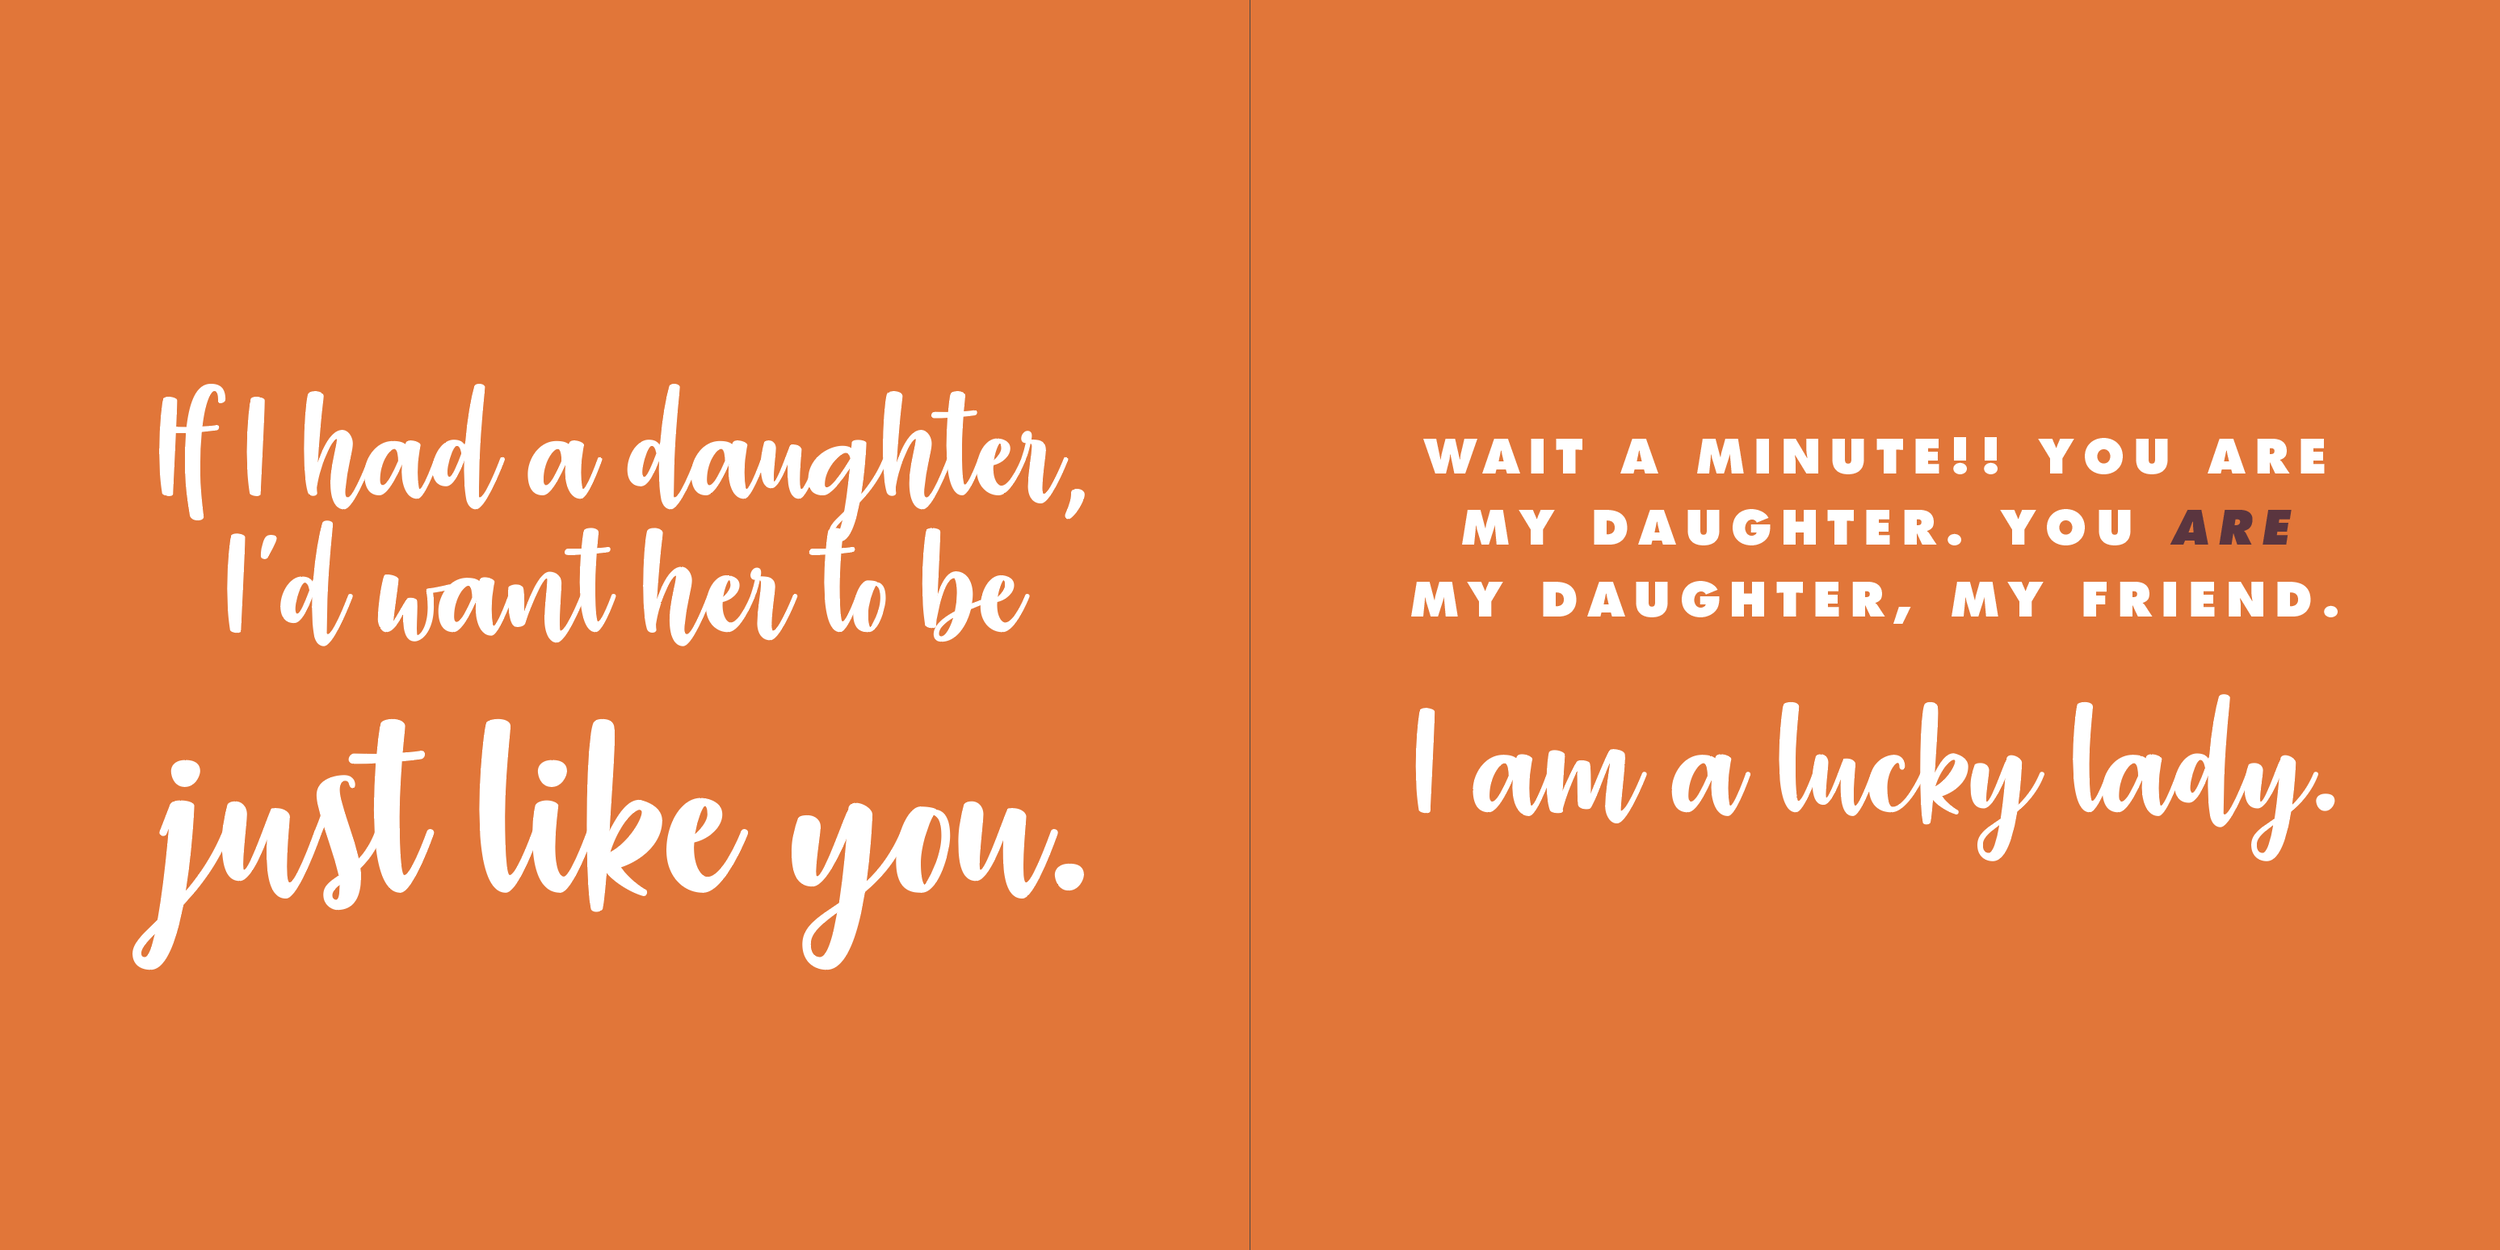 Book quote: If I had a daughter, I'd want her to be just like you. Wait a minute!! You are my daughter. You are my daughter, my friend. I am a lucky lady.